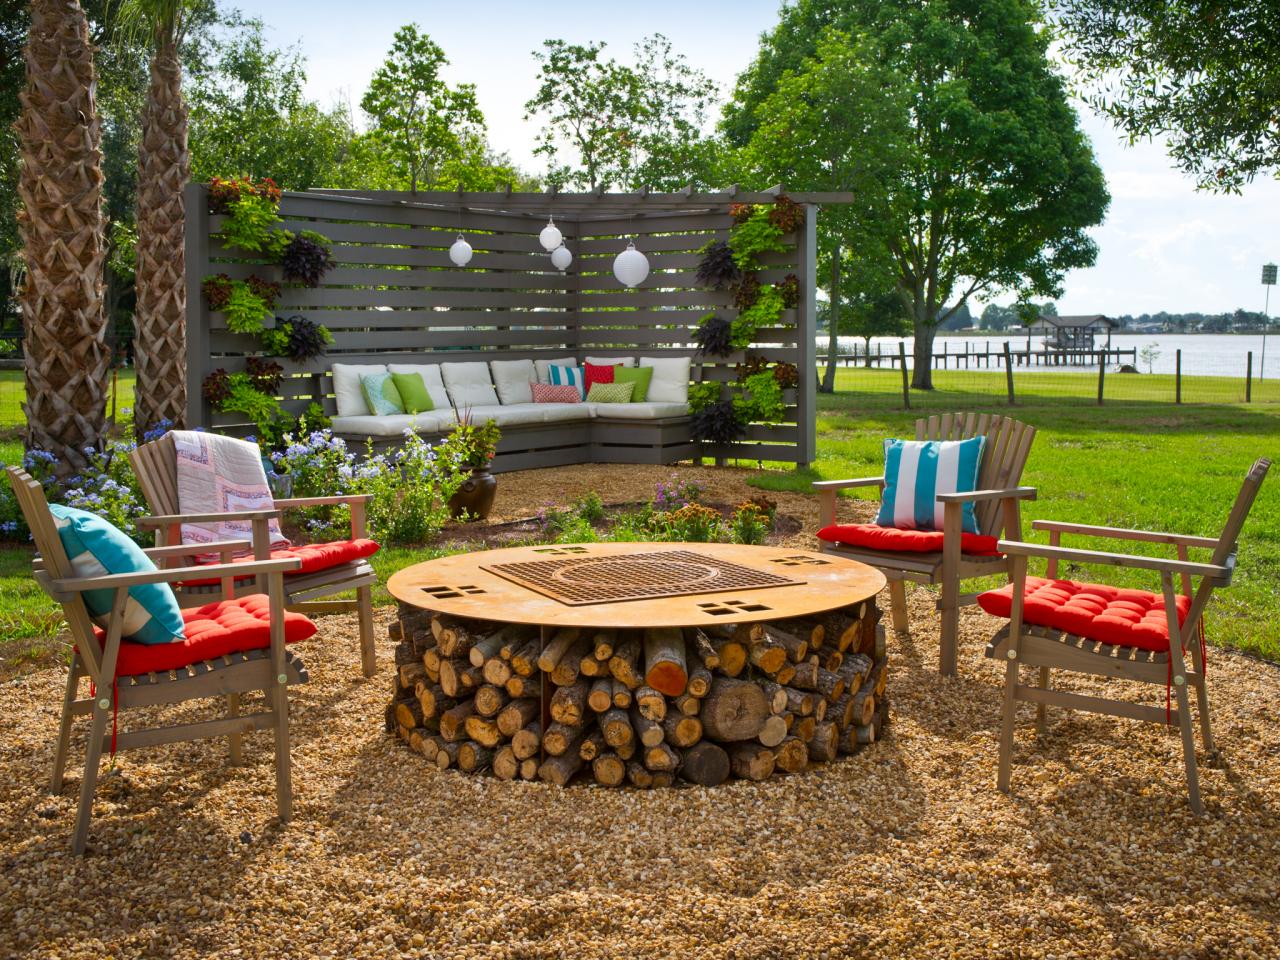 66 Fire Pit and Outdoor Fireplace Ideas | DIY Network Blog ...